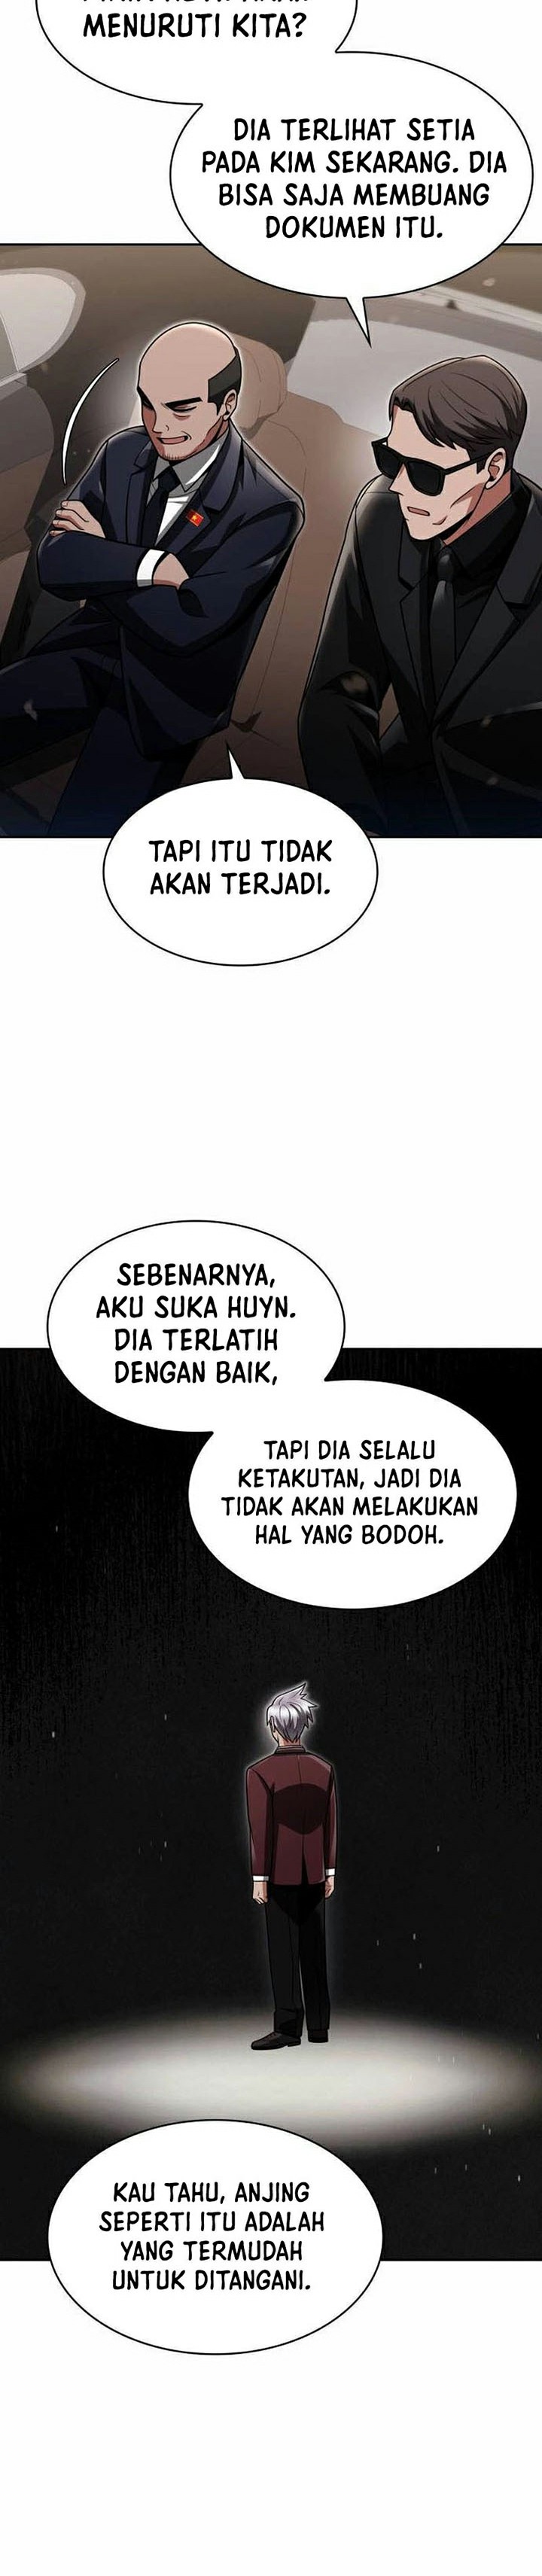 Dilarang COPAS - situs resmi www.mangacanblog.com - Komik clever cleaning life of the returned genius hunter 062 - chapter 62 63 Indonesia clever cleaning life of the returned genius hunter 062 - chapter 62 Terbaru 30|Baca Manga Komik Indonesia|Mangacan